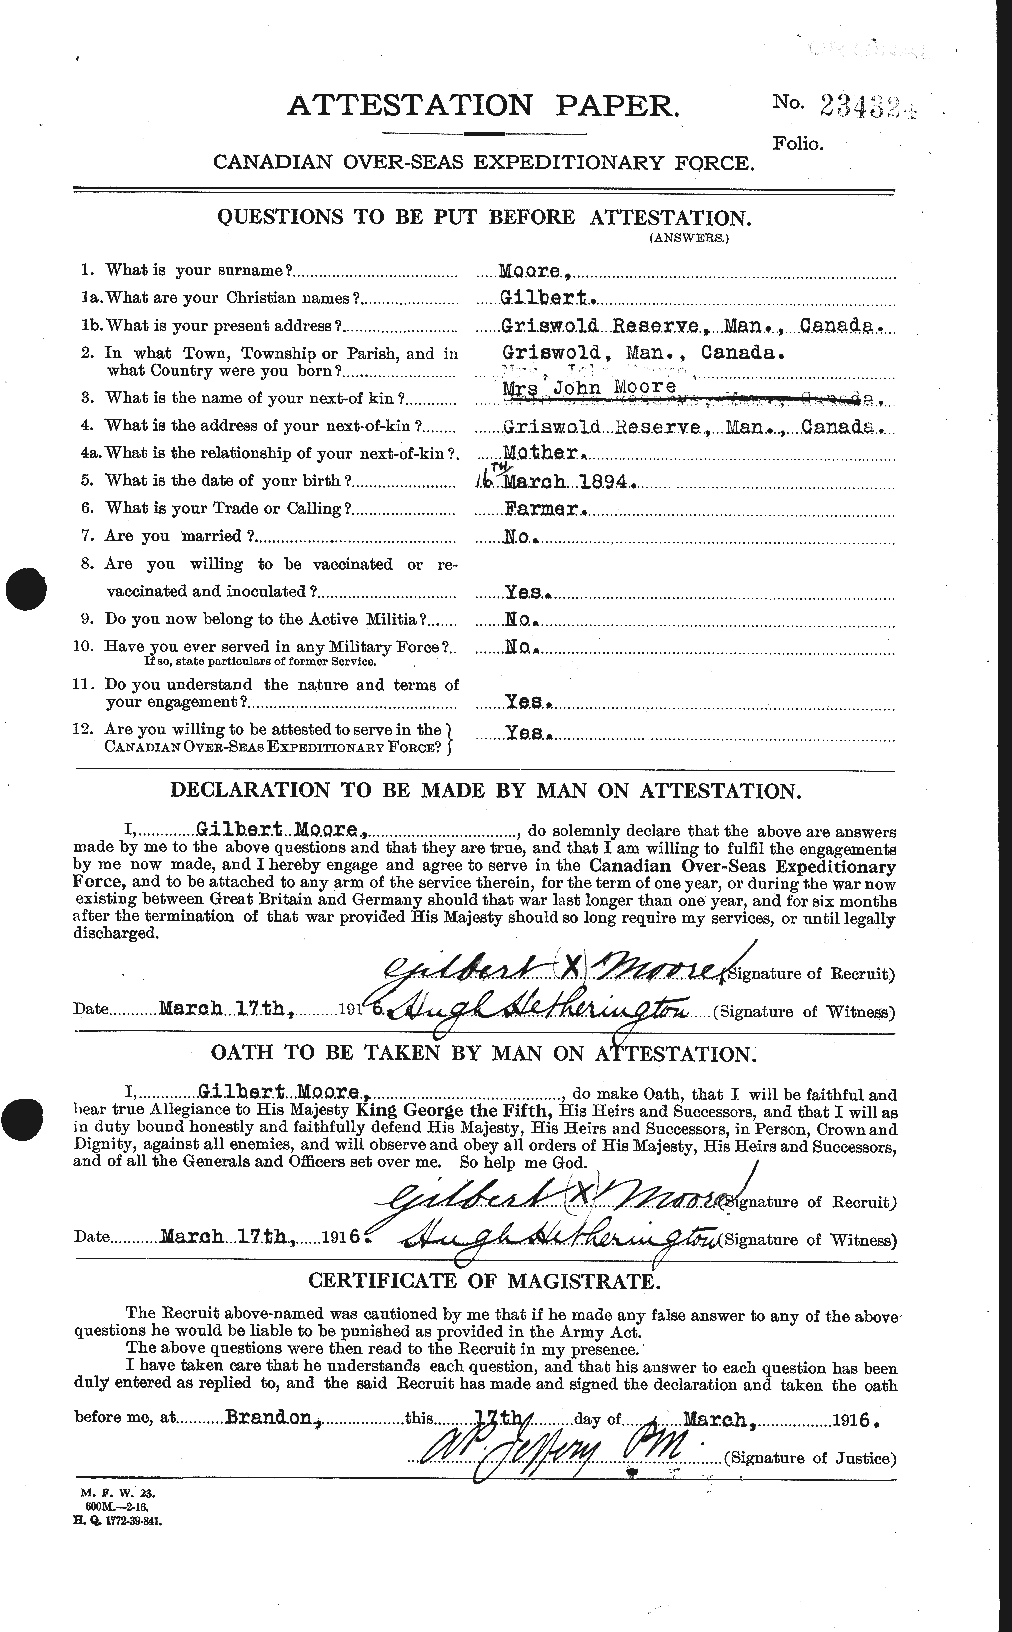 Personnel Records of the First World War - CEF 502037a